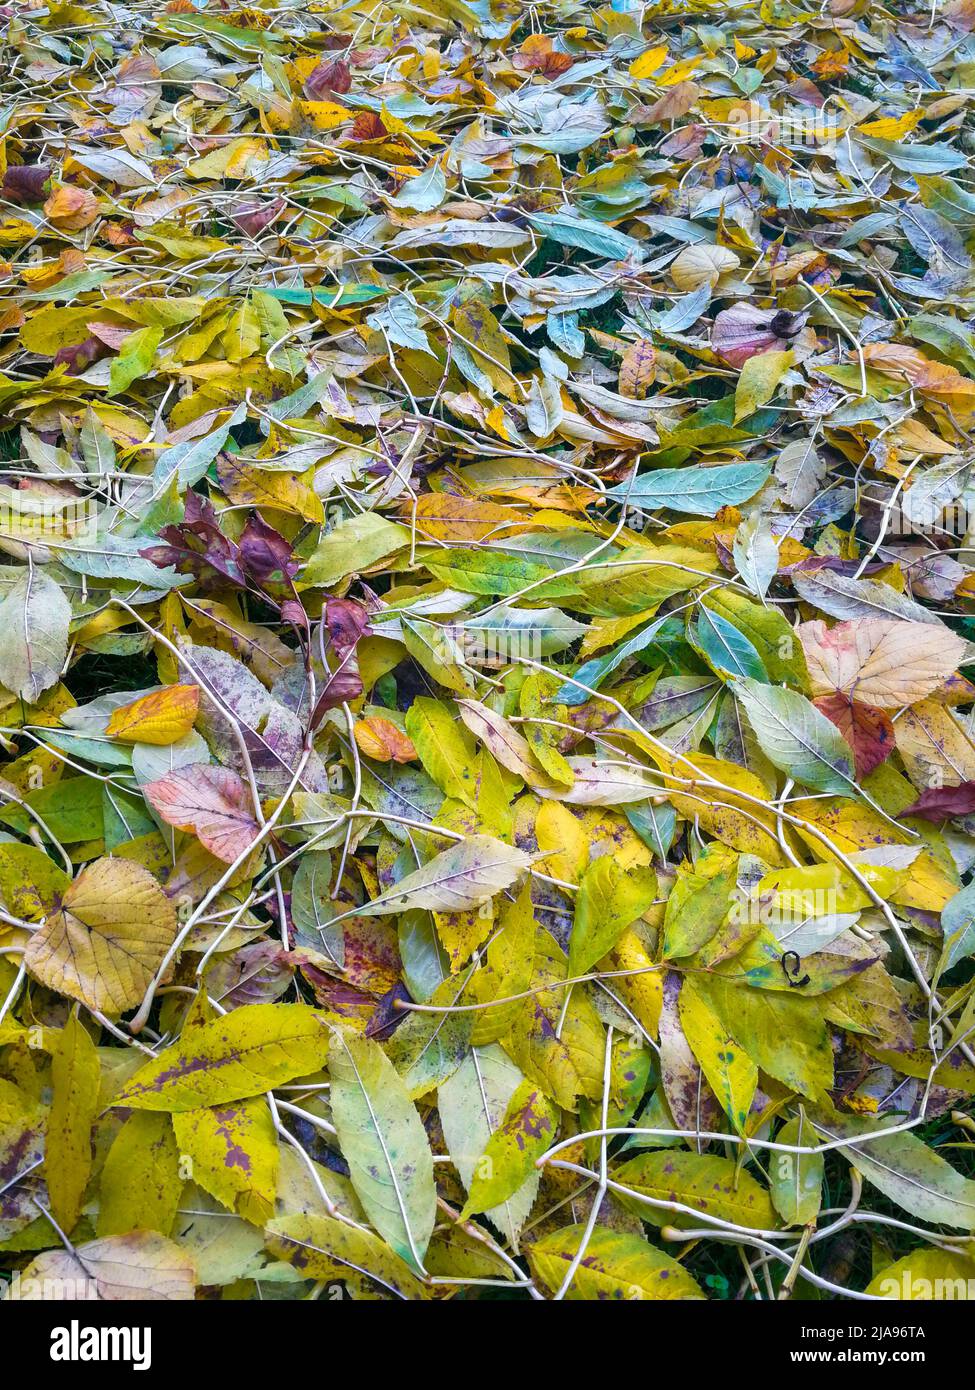 Colorful autumn leaves on the floor. Stock Photo